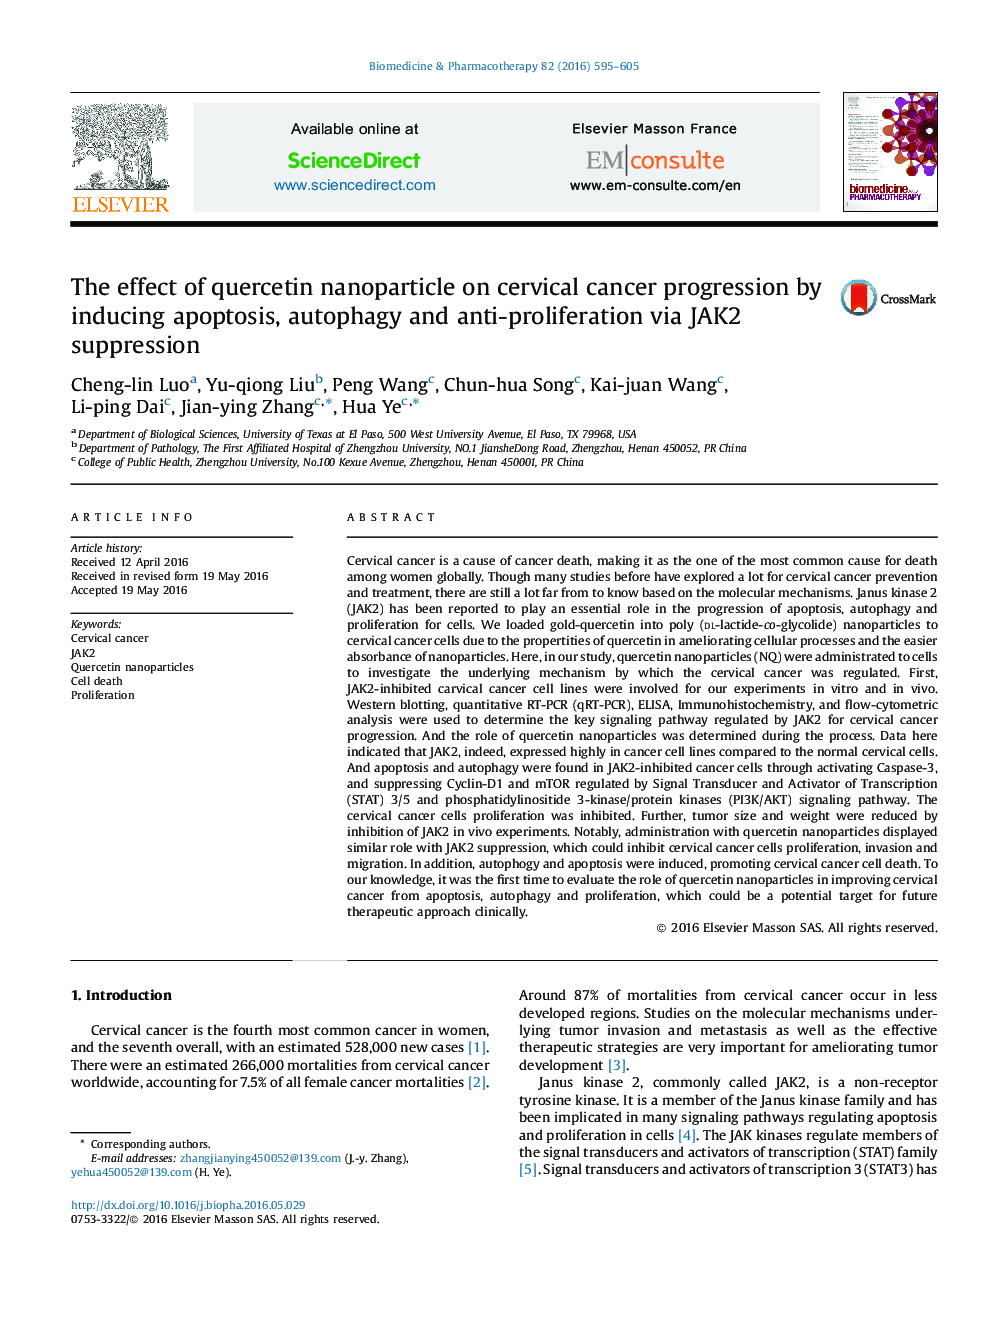 The effect of quercetin nanoparticle on cervical cancer progression by inducing apoptosis, autophagy and anti-proliferation via JAK2 suppression